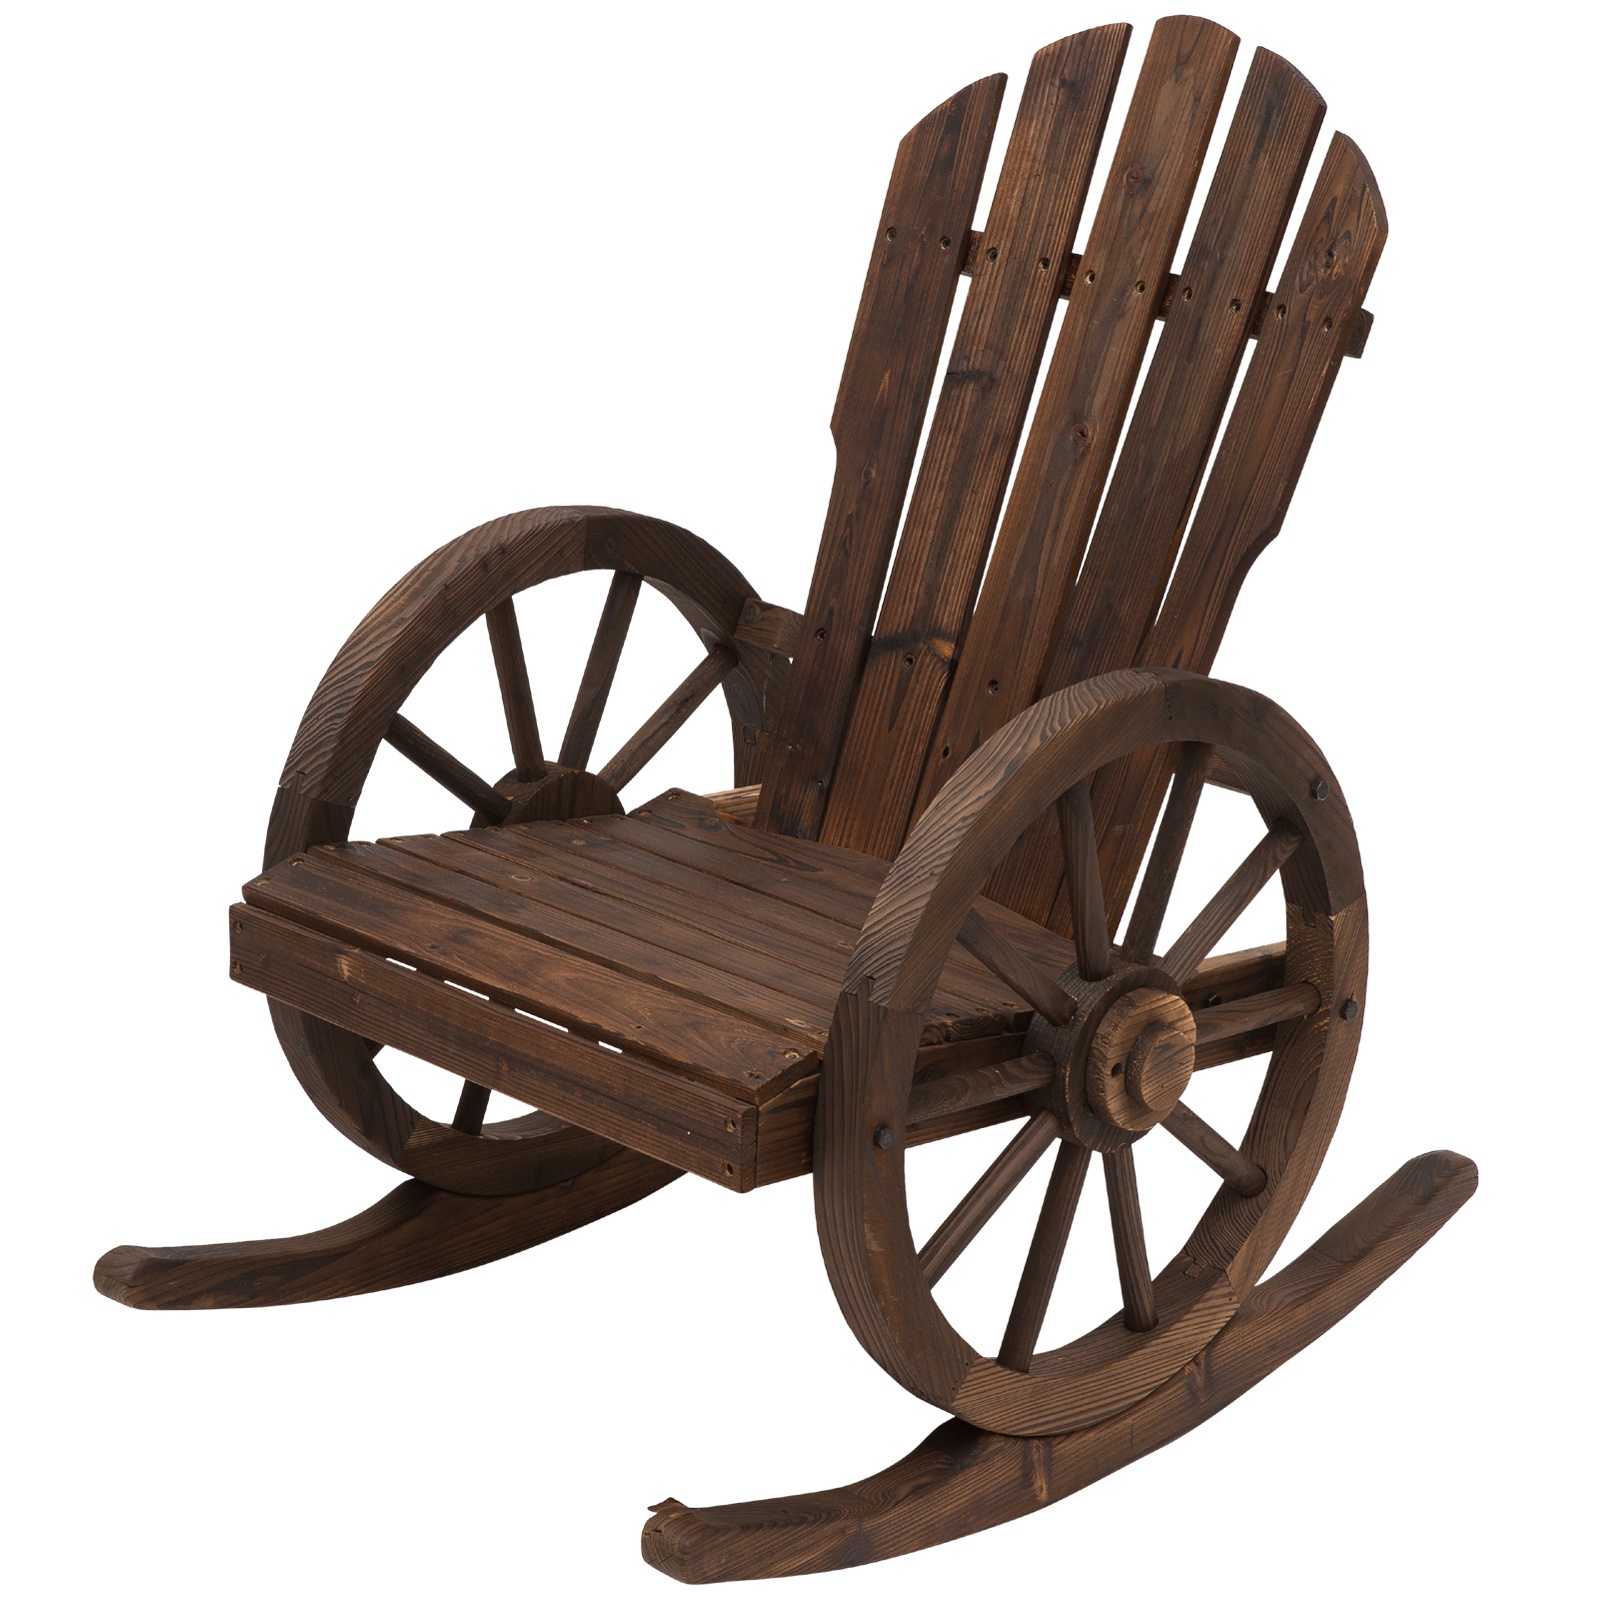 Outsunny Vintage Wooden Outdoor Rocking Chair with Timeless Relaxing Homey Design Wheel Armrest & All-Weather Fir Wood